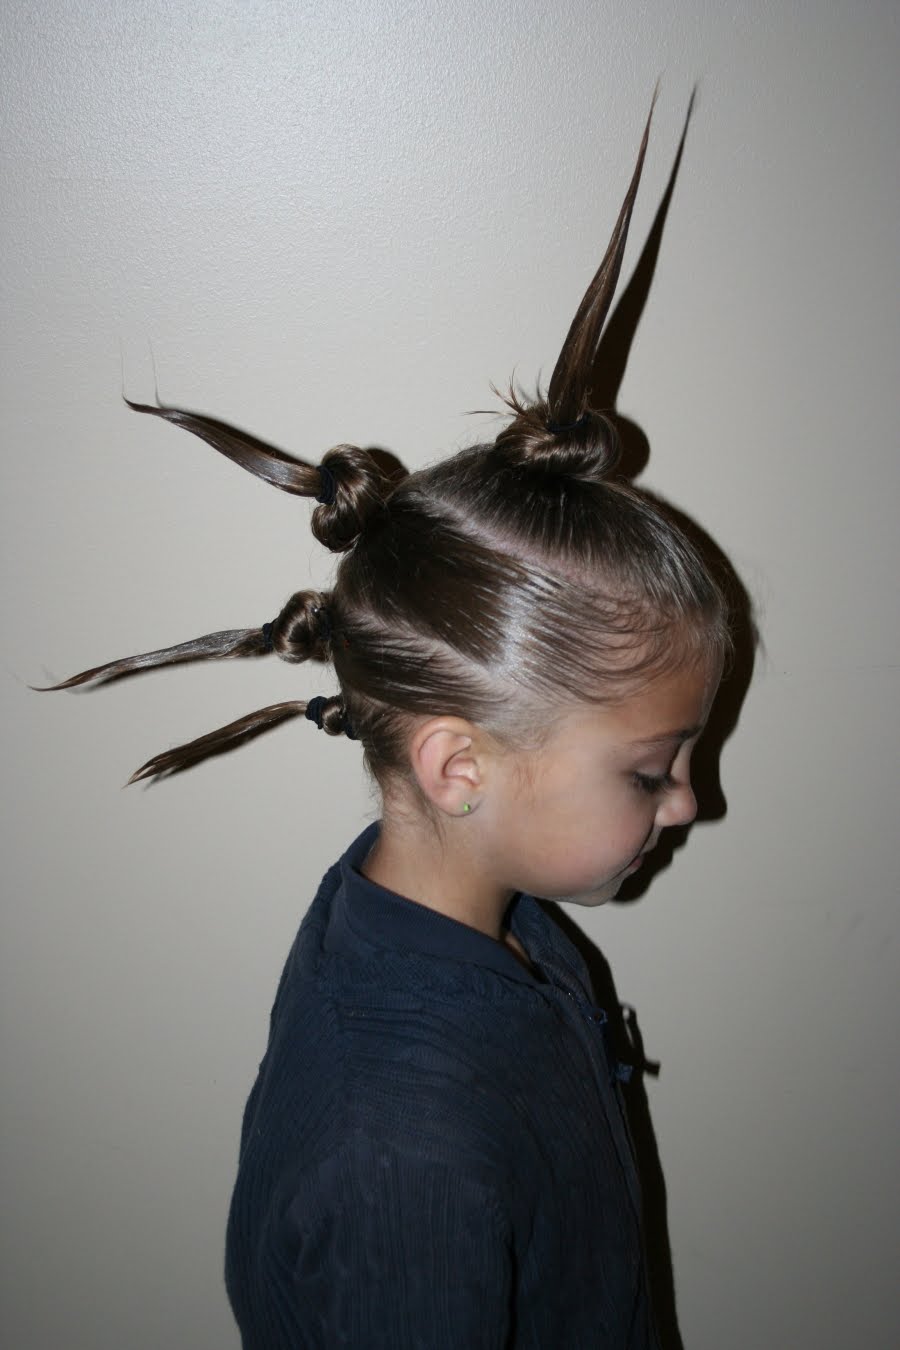 ... Crazy Hair Day! Please click Crazy Hair Day to see hairdoâ€™s from